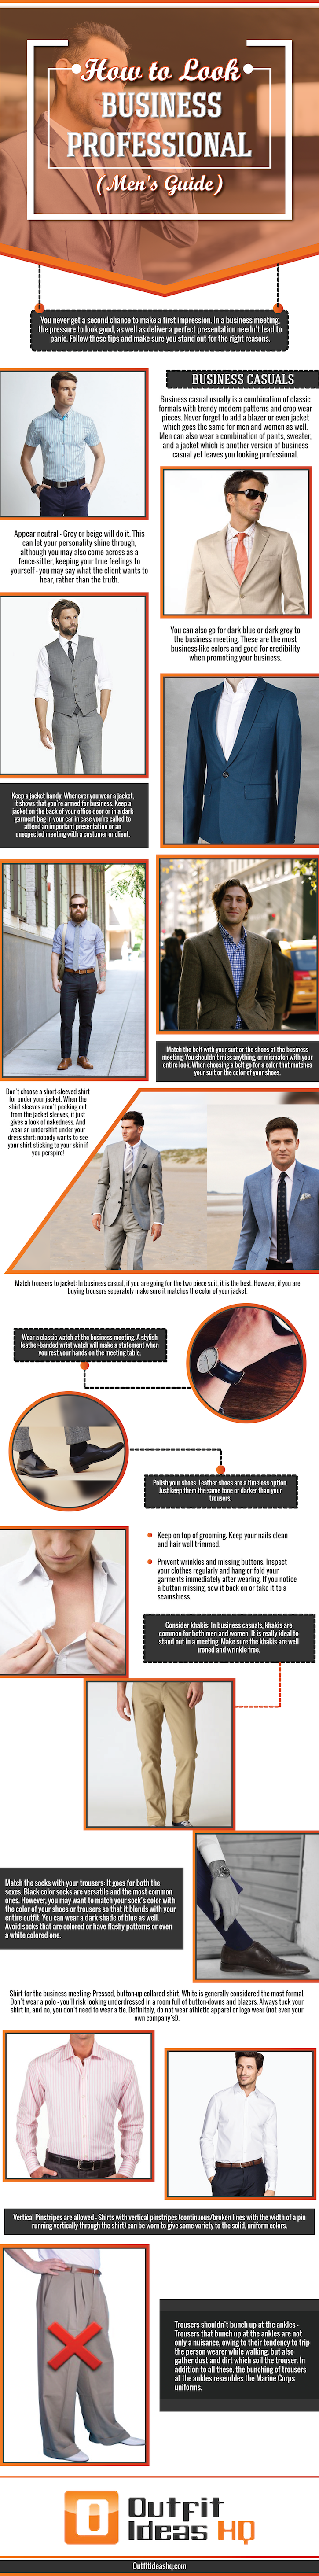 business professional for men infographic